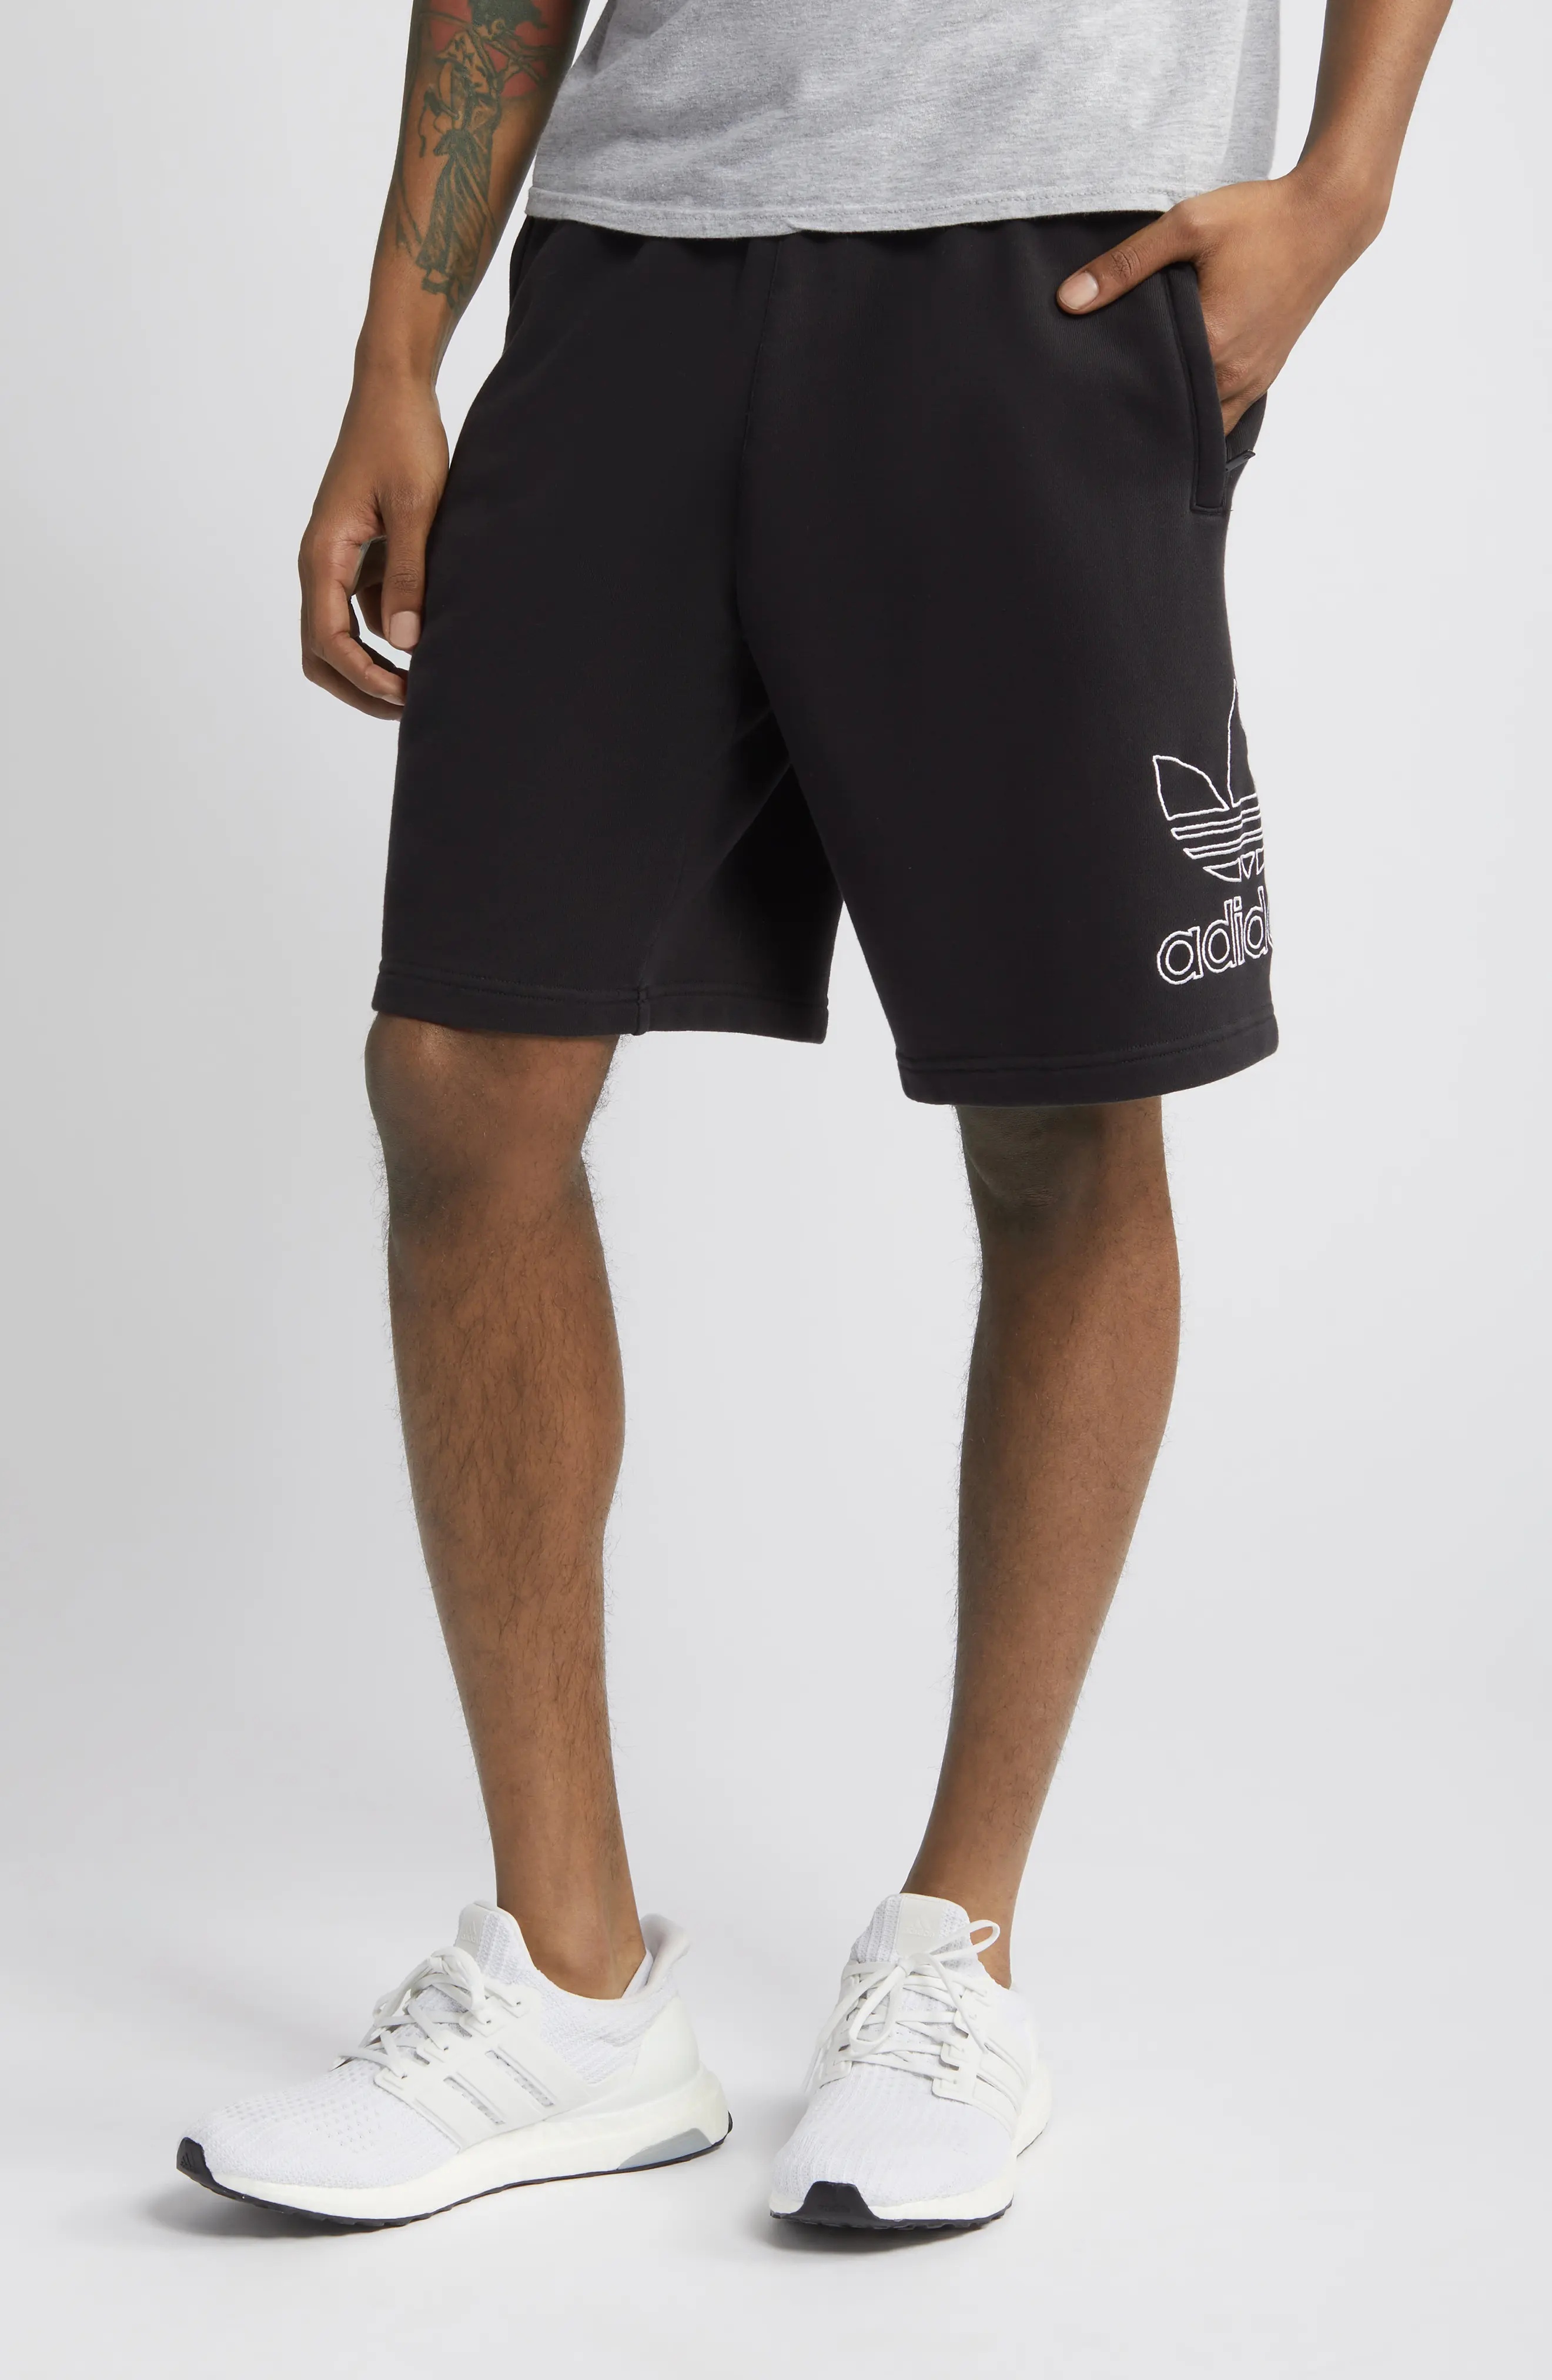 Trefoil Embroidered Sweat Shorts in Black/White - 1